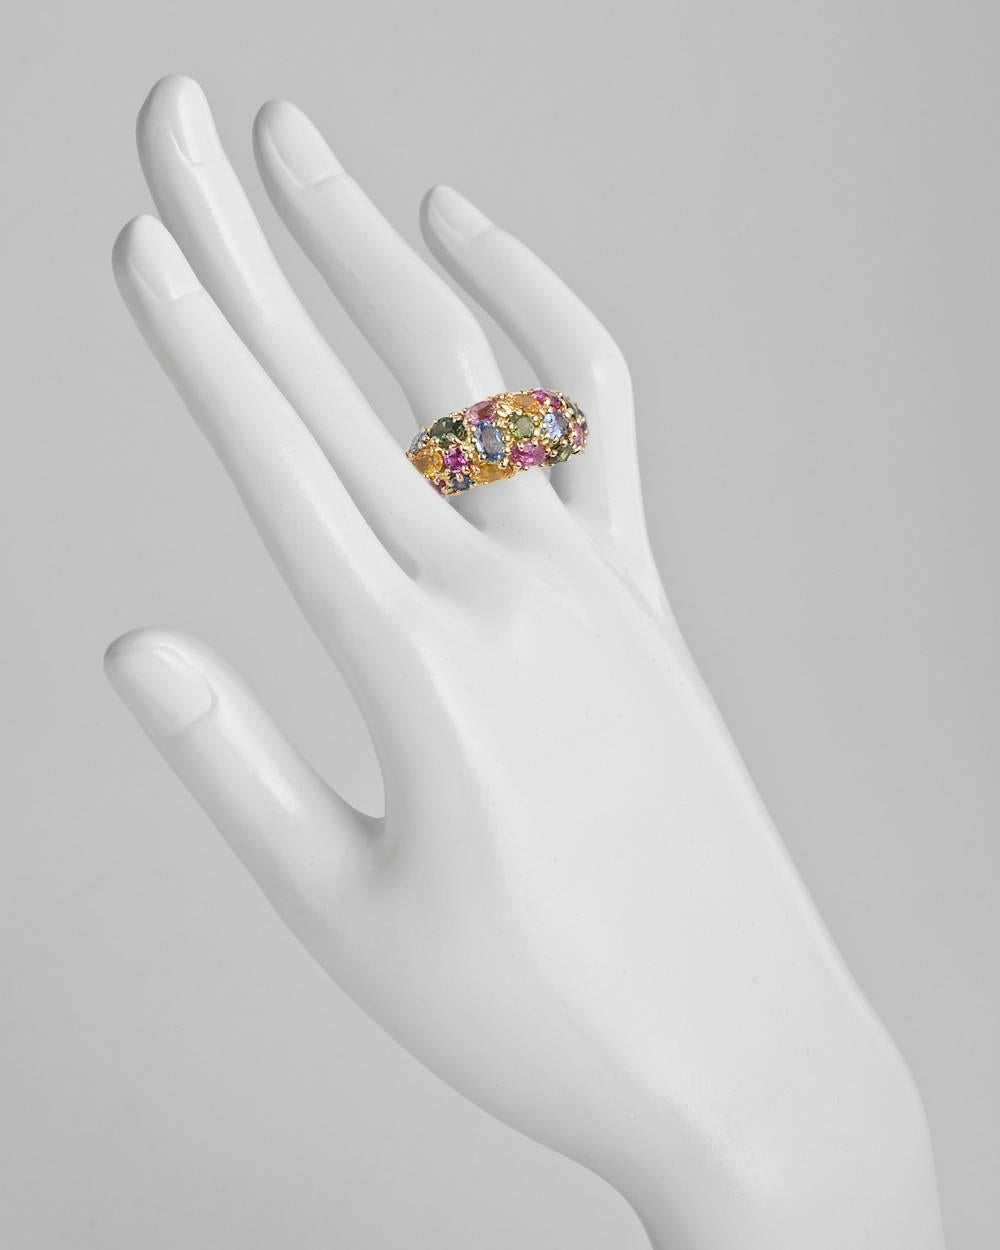 Multicolored sapphire wide band ring, showcasing round and oval-shaped sapphires in blue, green, pink and yellow hues, mounted in 18k yellow gold, signed Chaumet. Sapphires weighing approximately 6.00 total carats. Size 6.
